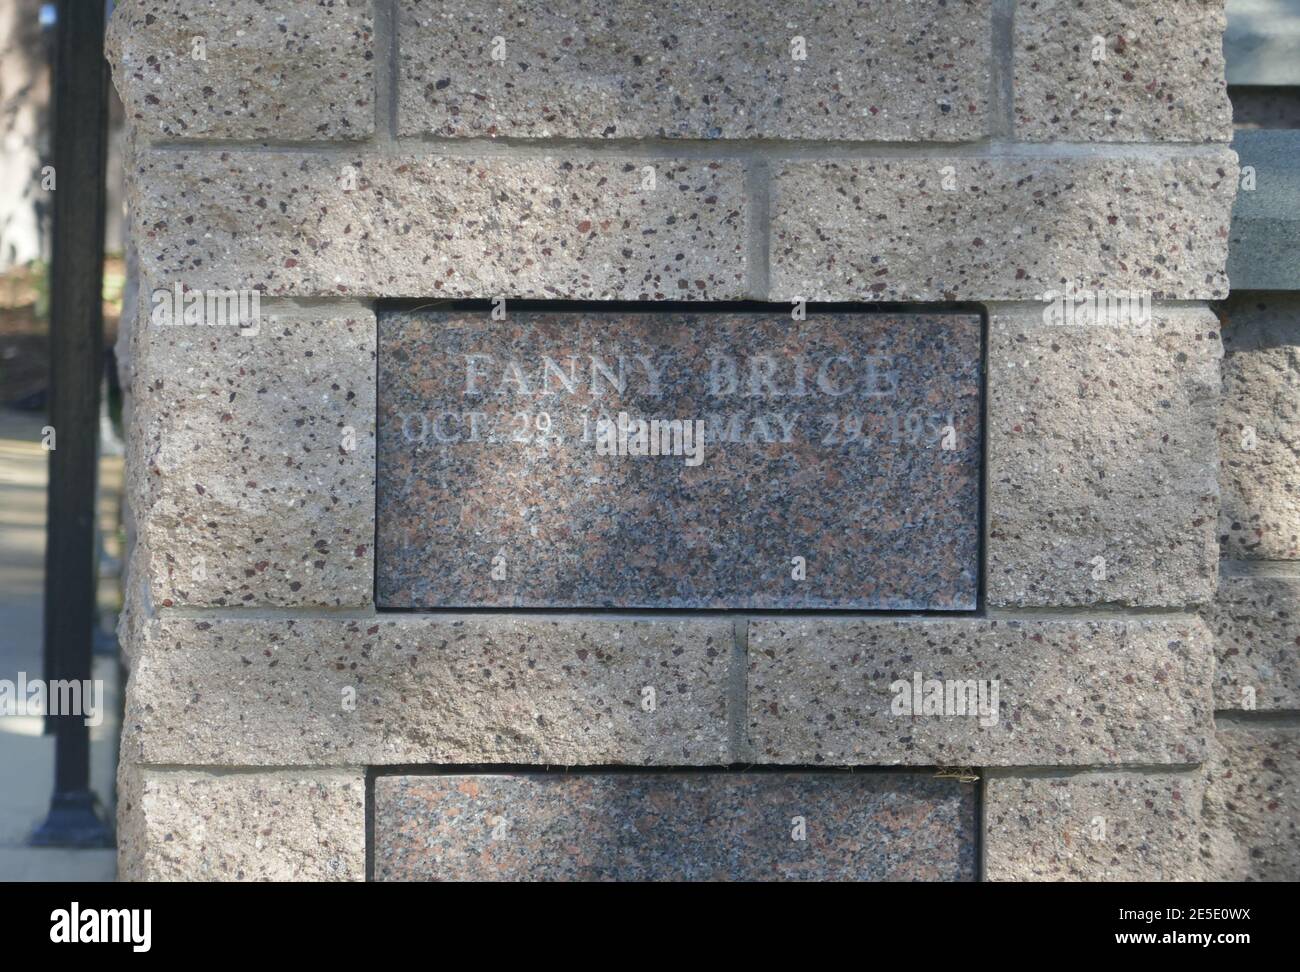 Los Angeles, California, USA 26th January 2021 A general view of atmosphere of comedian Fanny Brice's Grave at Pierce Brothers Westwood Village Memorial Park on January 26, 2021 in Los Angeles, California, USA. Photo by Barry King/Alamy Stock Photo Stock Photo